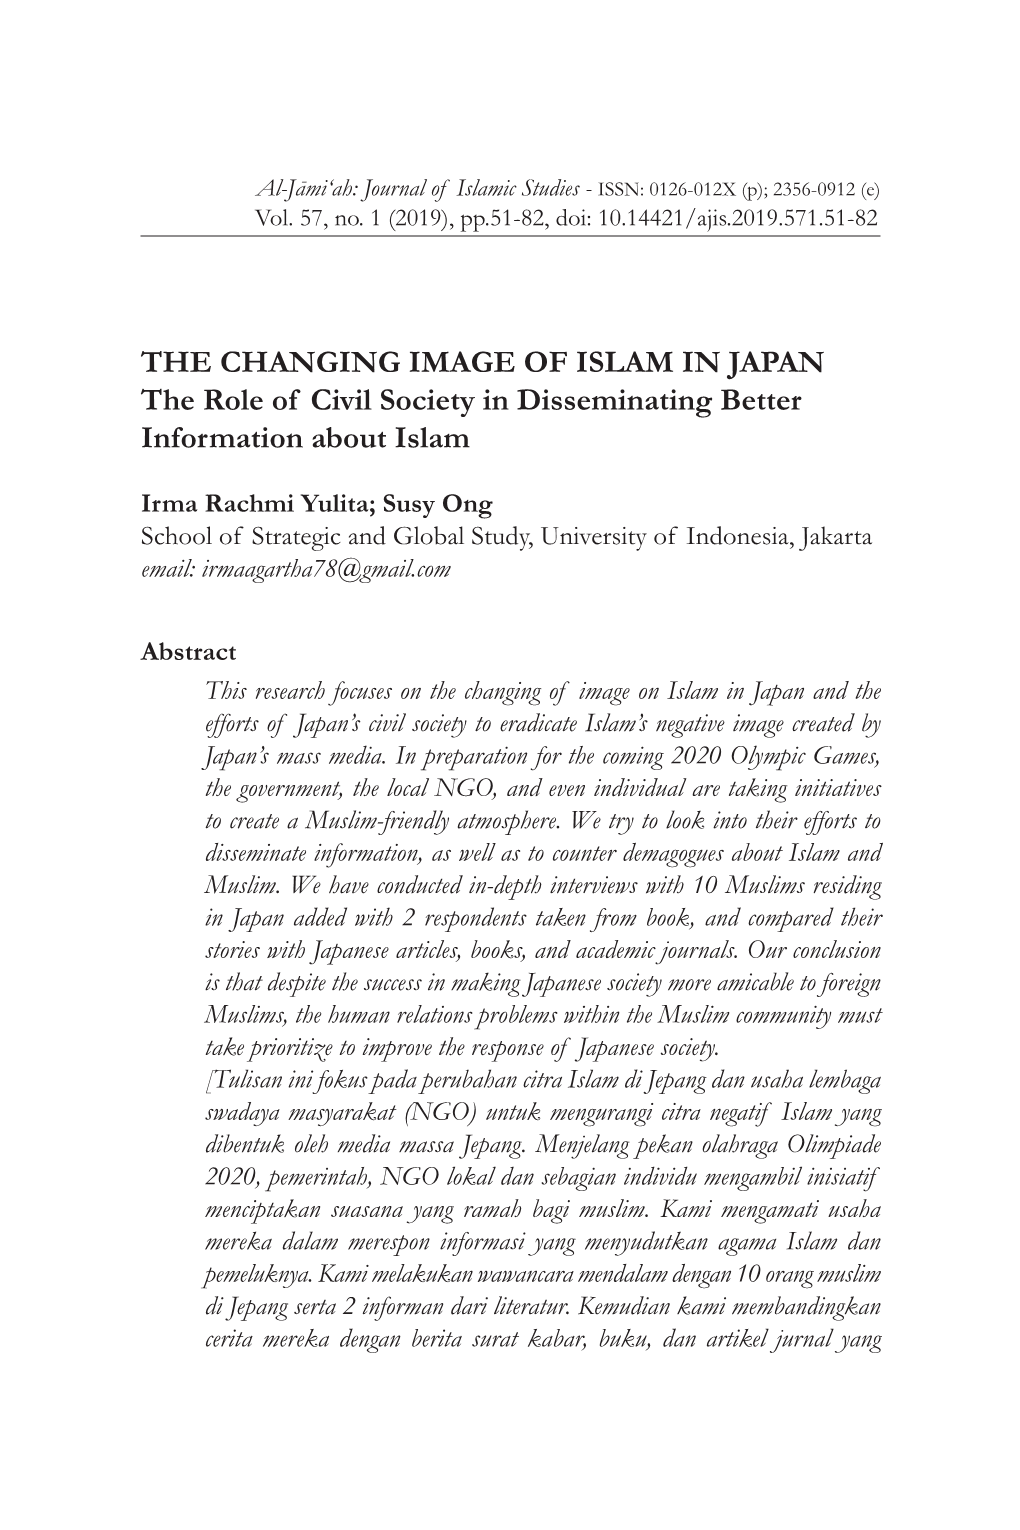 THE CHANGING IMAGE of ISLAM in JAPAN the Role of Civil Society in Disseminating Better Information About Islam